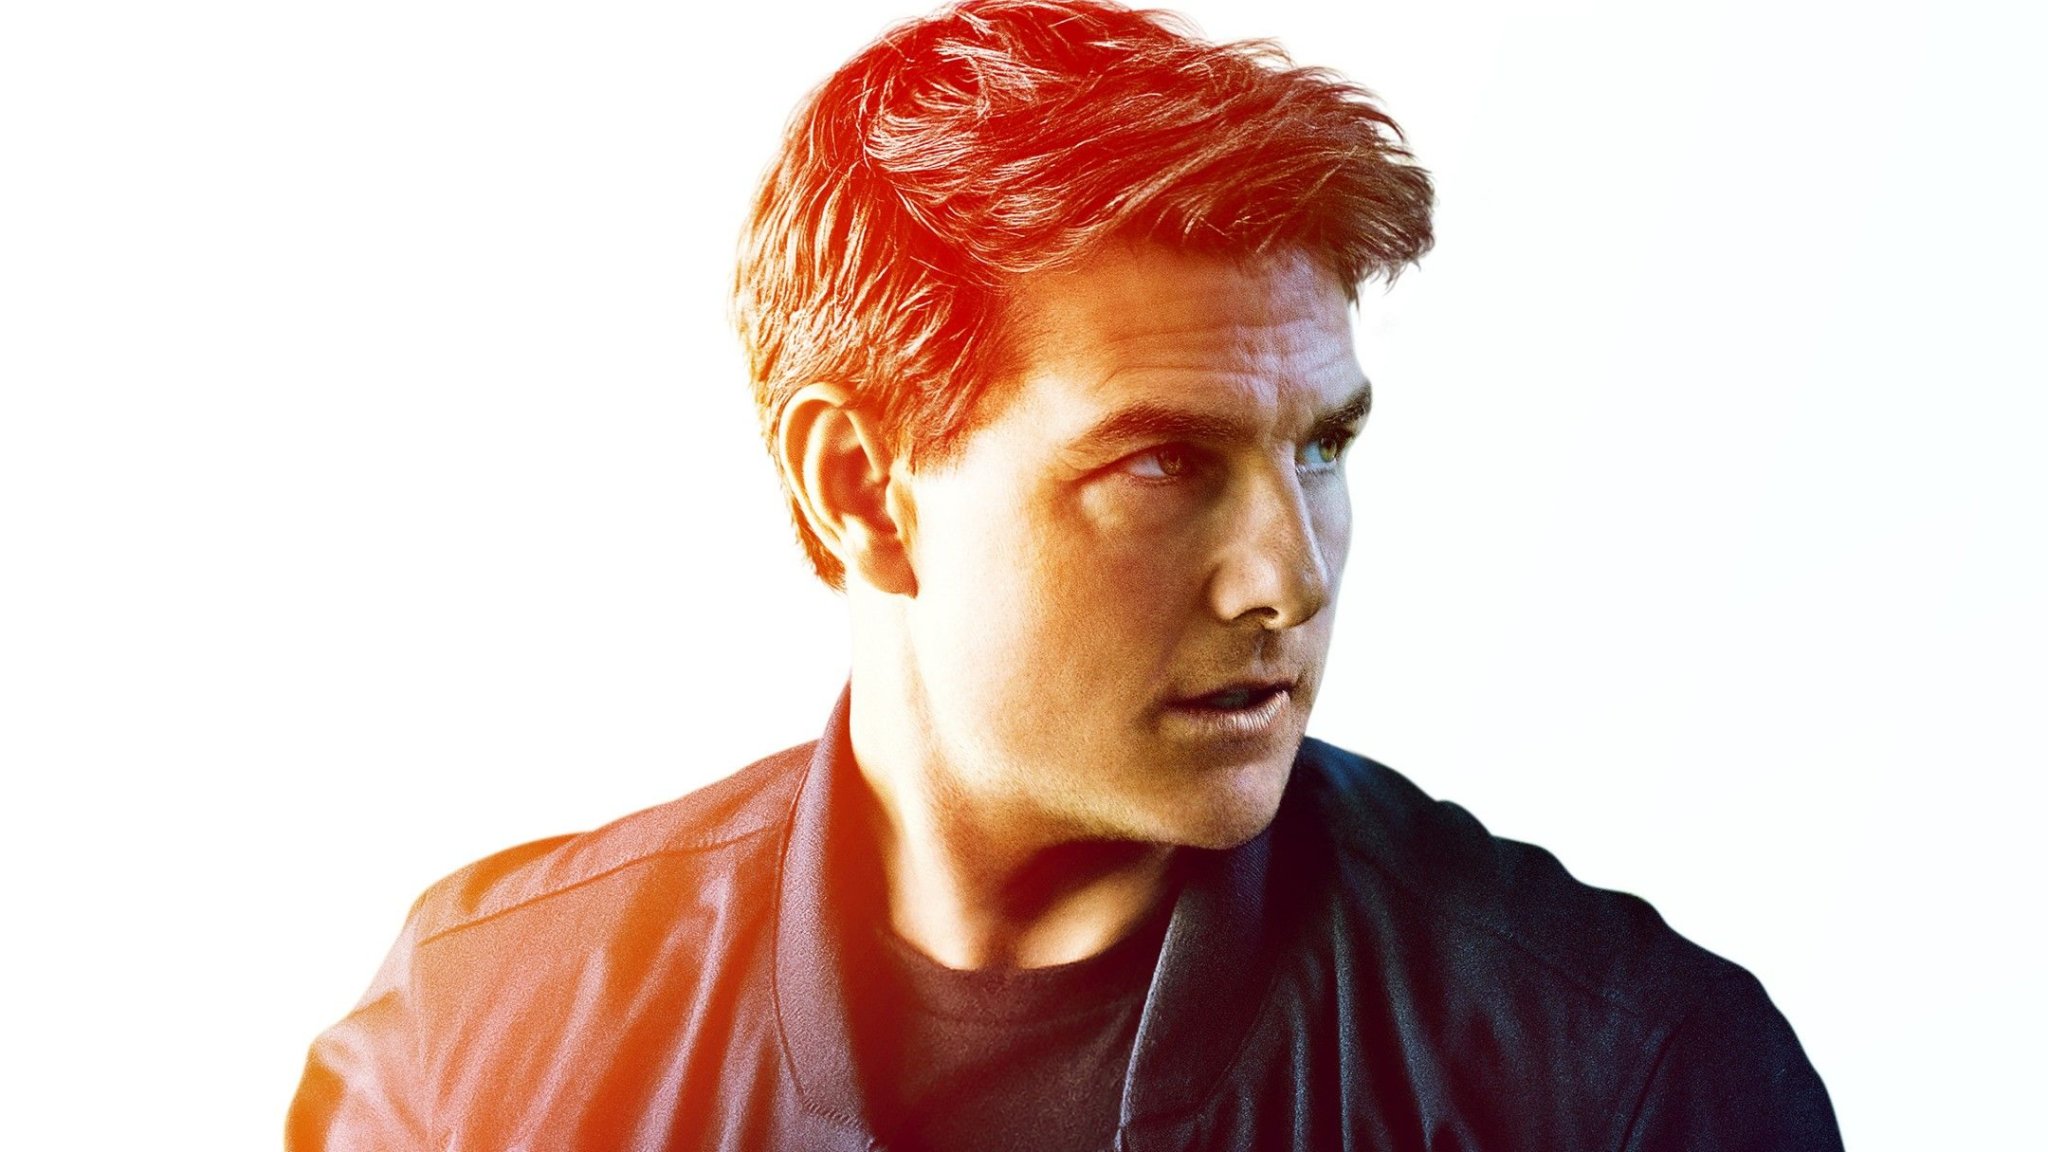 Exclusive: Tom Cruise In Advance Talks To Join Marvel In Major Role